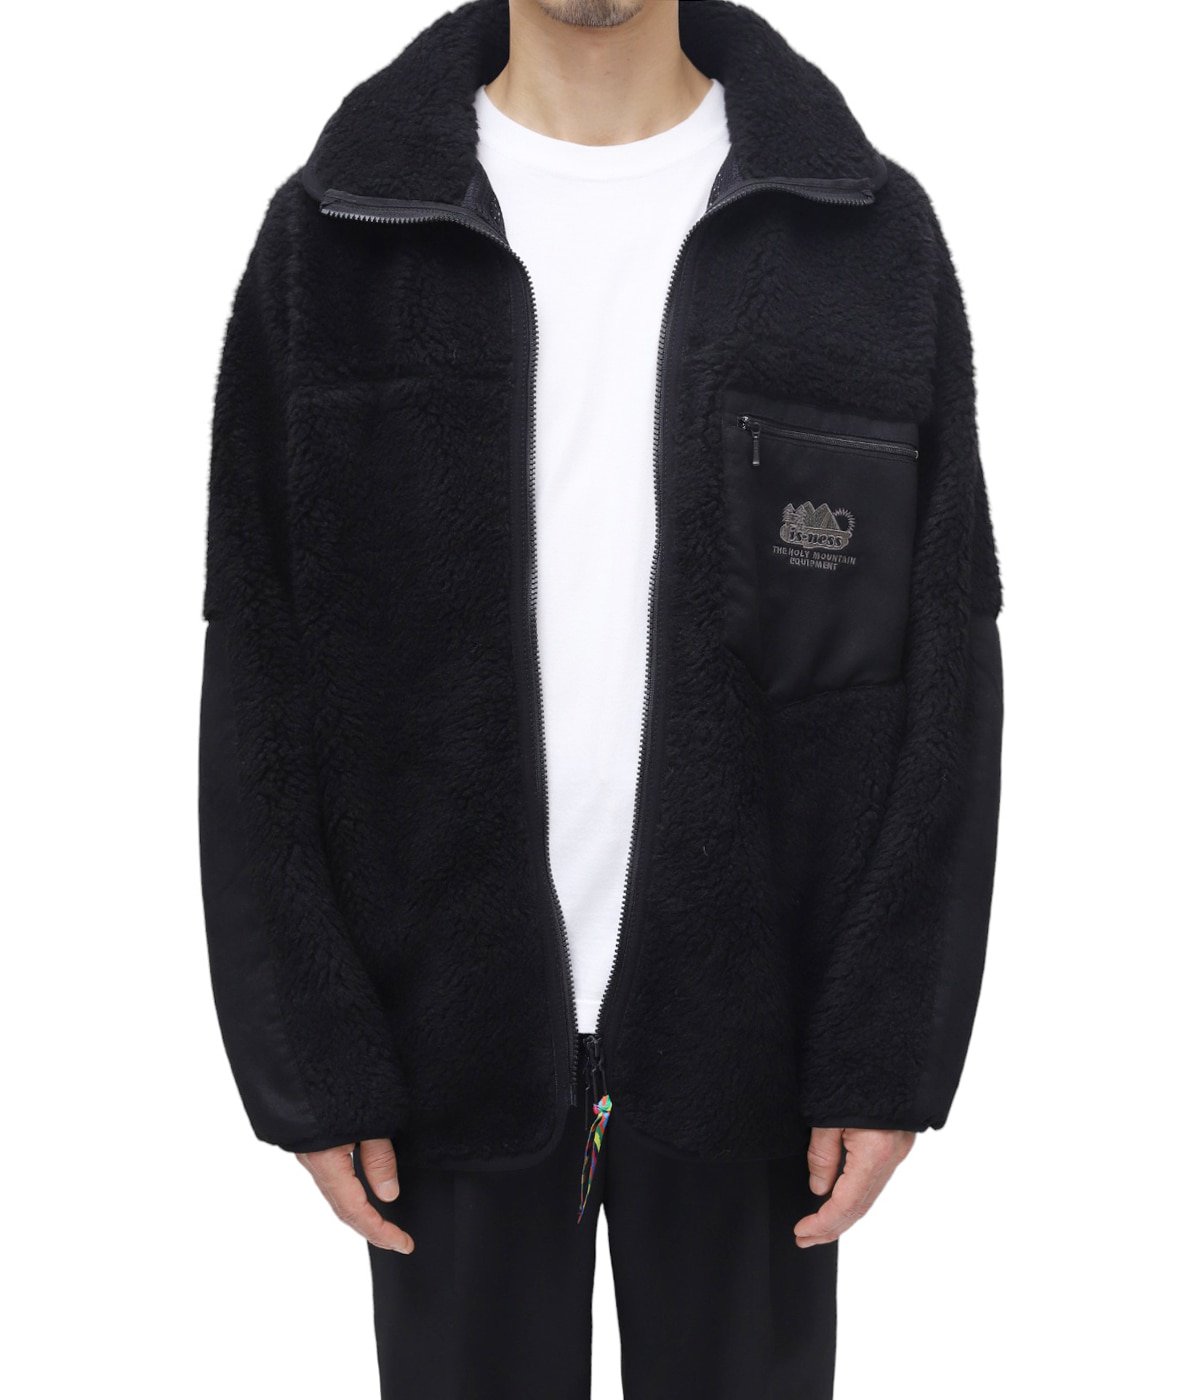 THM FLEECE JACKET is-ness×Y(dot)BY NORDISK